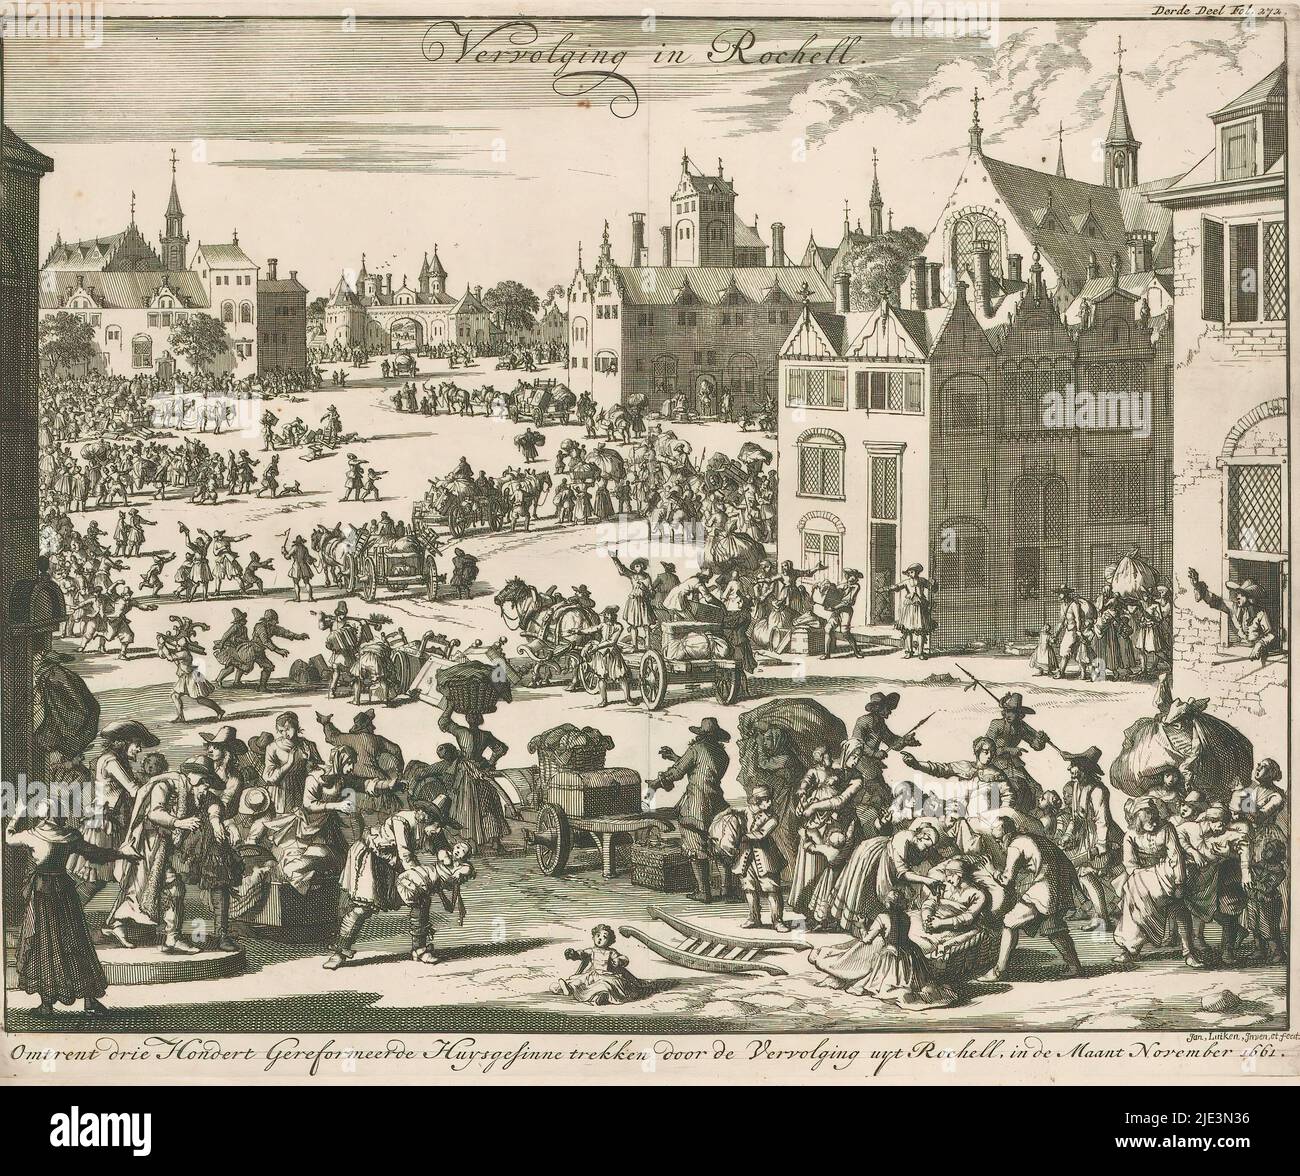 Persecution of Protestants at La Rochelle, 1661, Persecution at Rochell. Omtrent drie Hondert Gereformeerde Huysgesinne trekken door de Vervolging uyt Rochell, in de Maant November 1661 (title on object), Persecution of Protestants in La Rochelle leads to an exodus of three hundred families, November 1661. Print marked top right: Third Volume Fol. 272., print maker: Jan Luyken, (mentioned on object), after own design by: Jan Luyken, (mentioned on object), Amsterdam, 1696, paper, etching, height 291 mm × width 359 mm Stock Photo